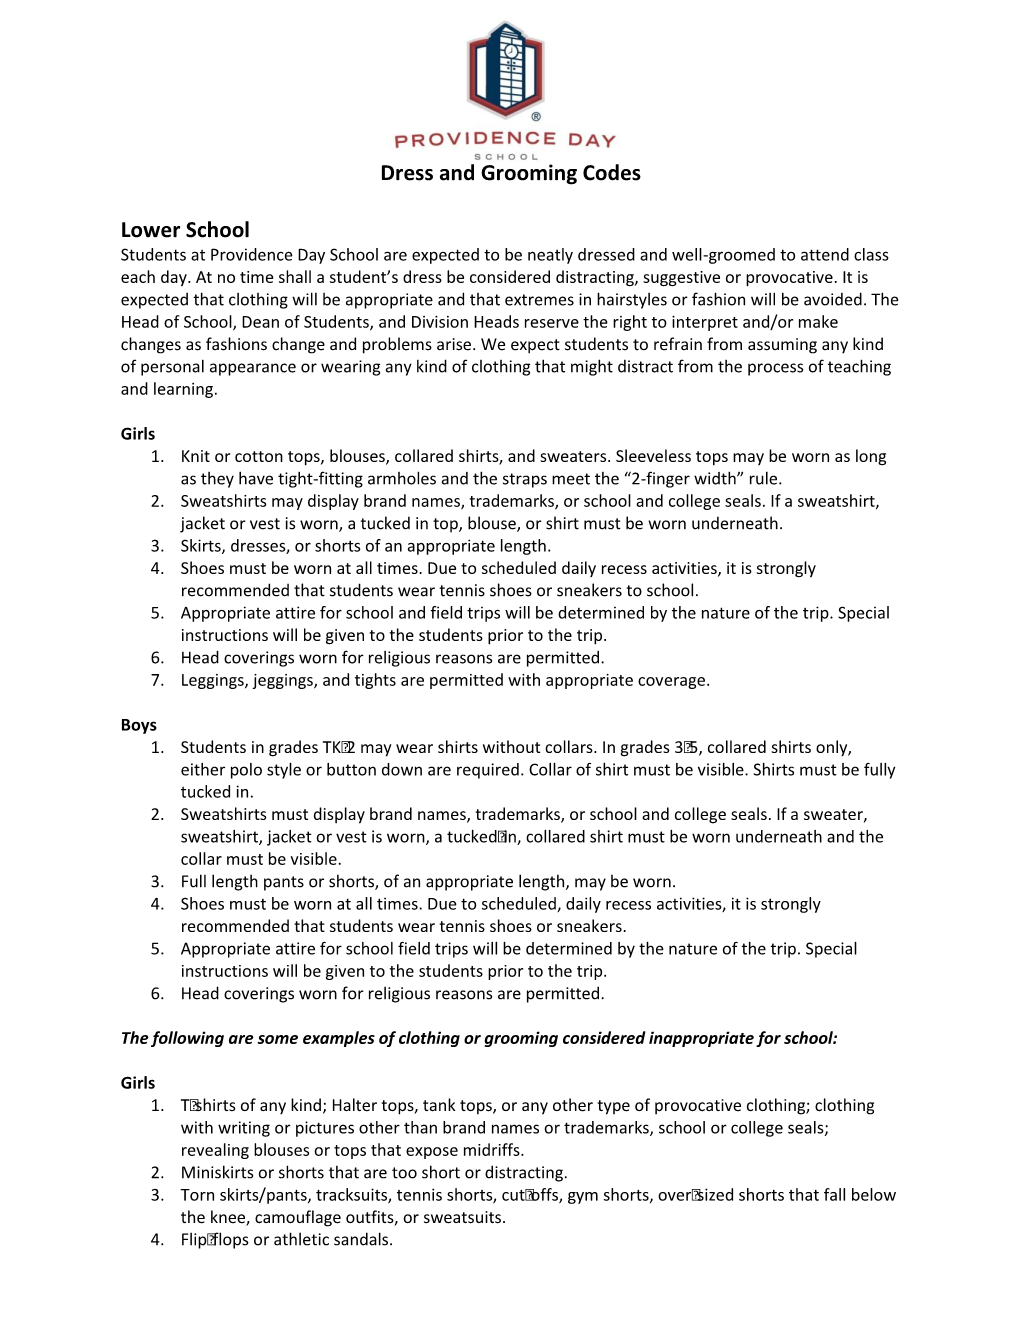 Dress and Grooming Codes Lower School